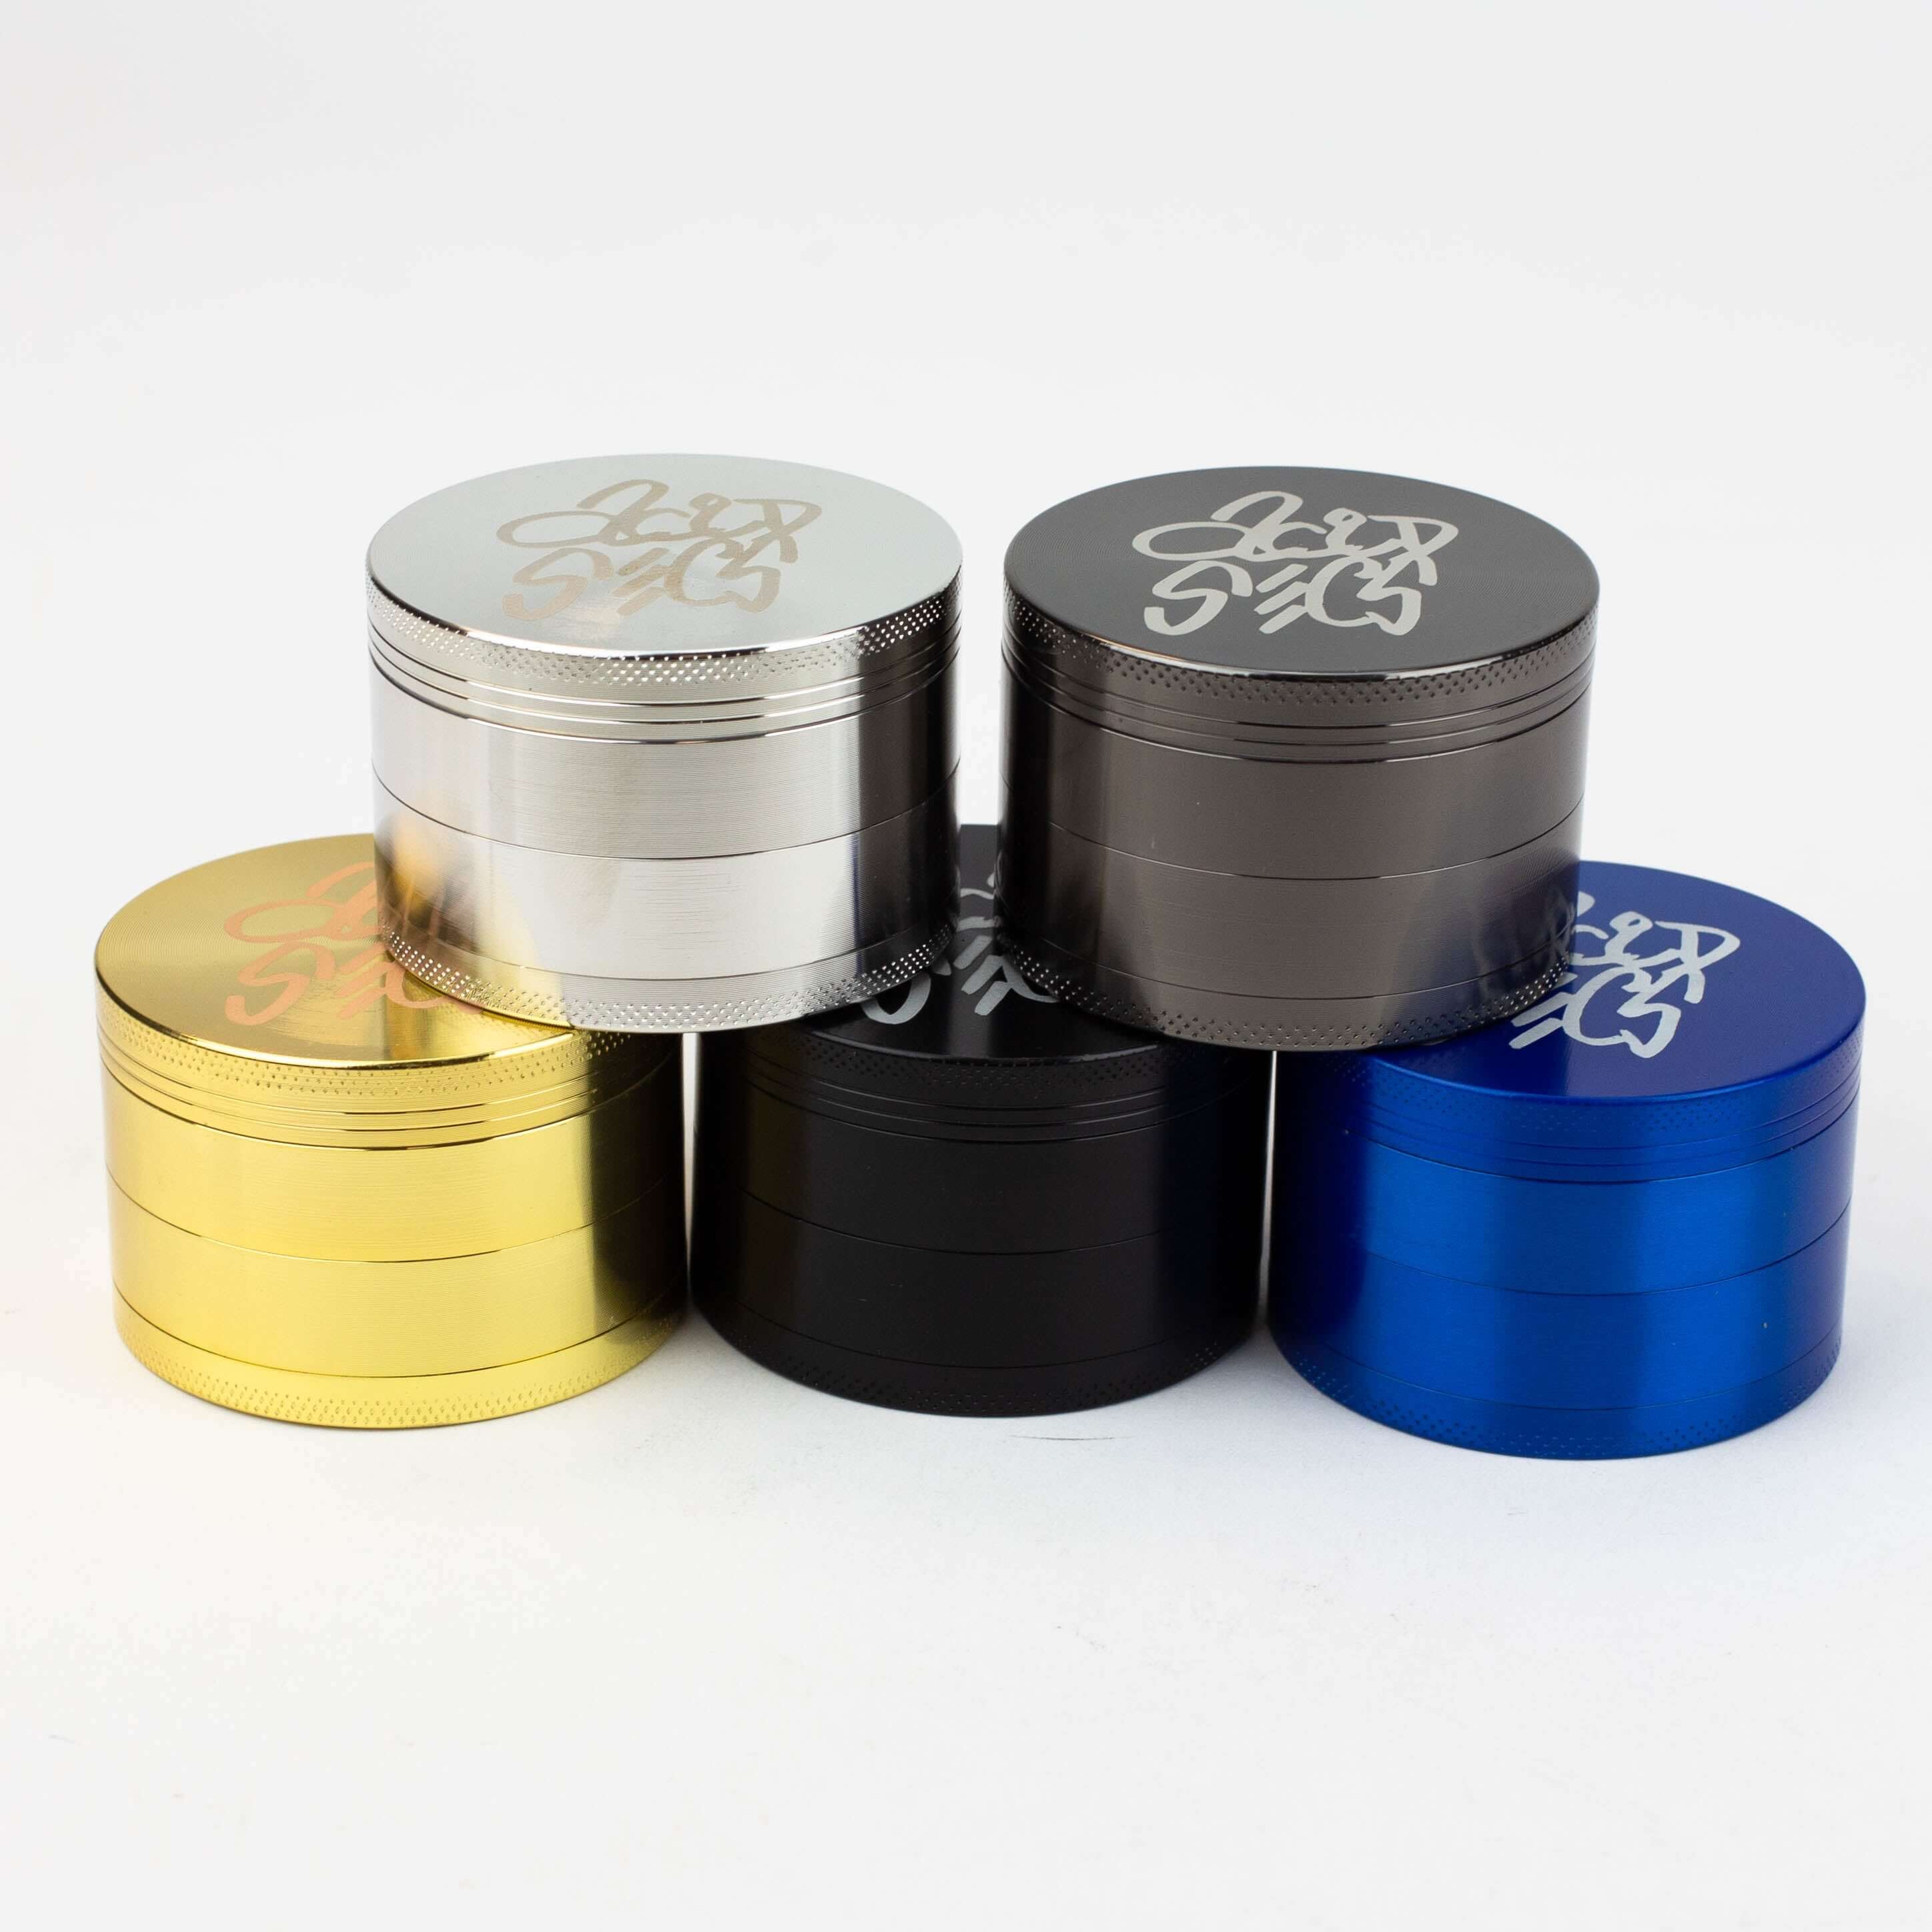 Acid Secs 4 Parts Metal Herb Large Grinder - 63mm
Acid Secs Productions Inc.
4 Parts Diameter: 2.5" / 63mm Height: 1.7" Easy to use Material: Steel Eligible for $15 Flat Rate Shipping
Herb Grinders, Smoking Essentials